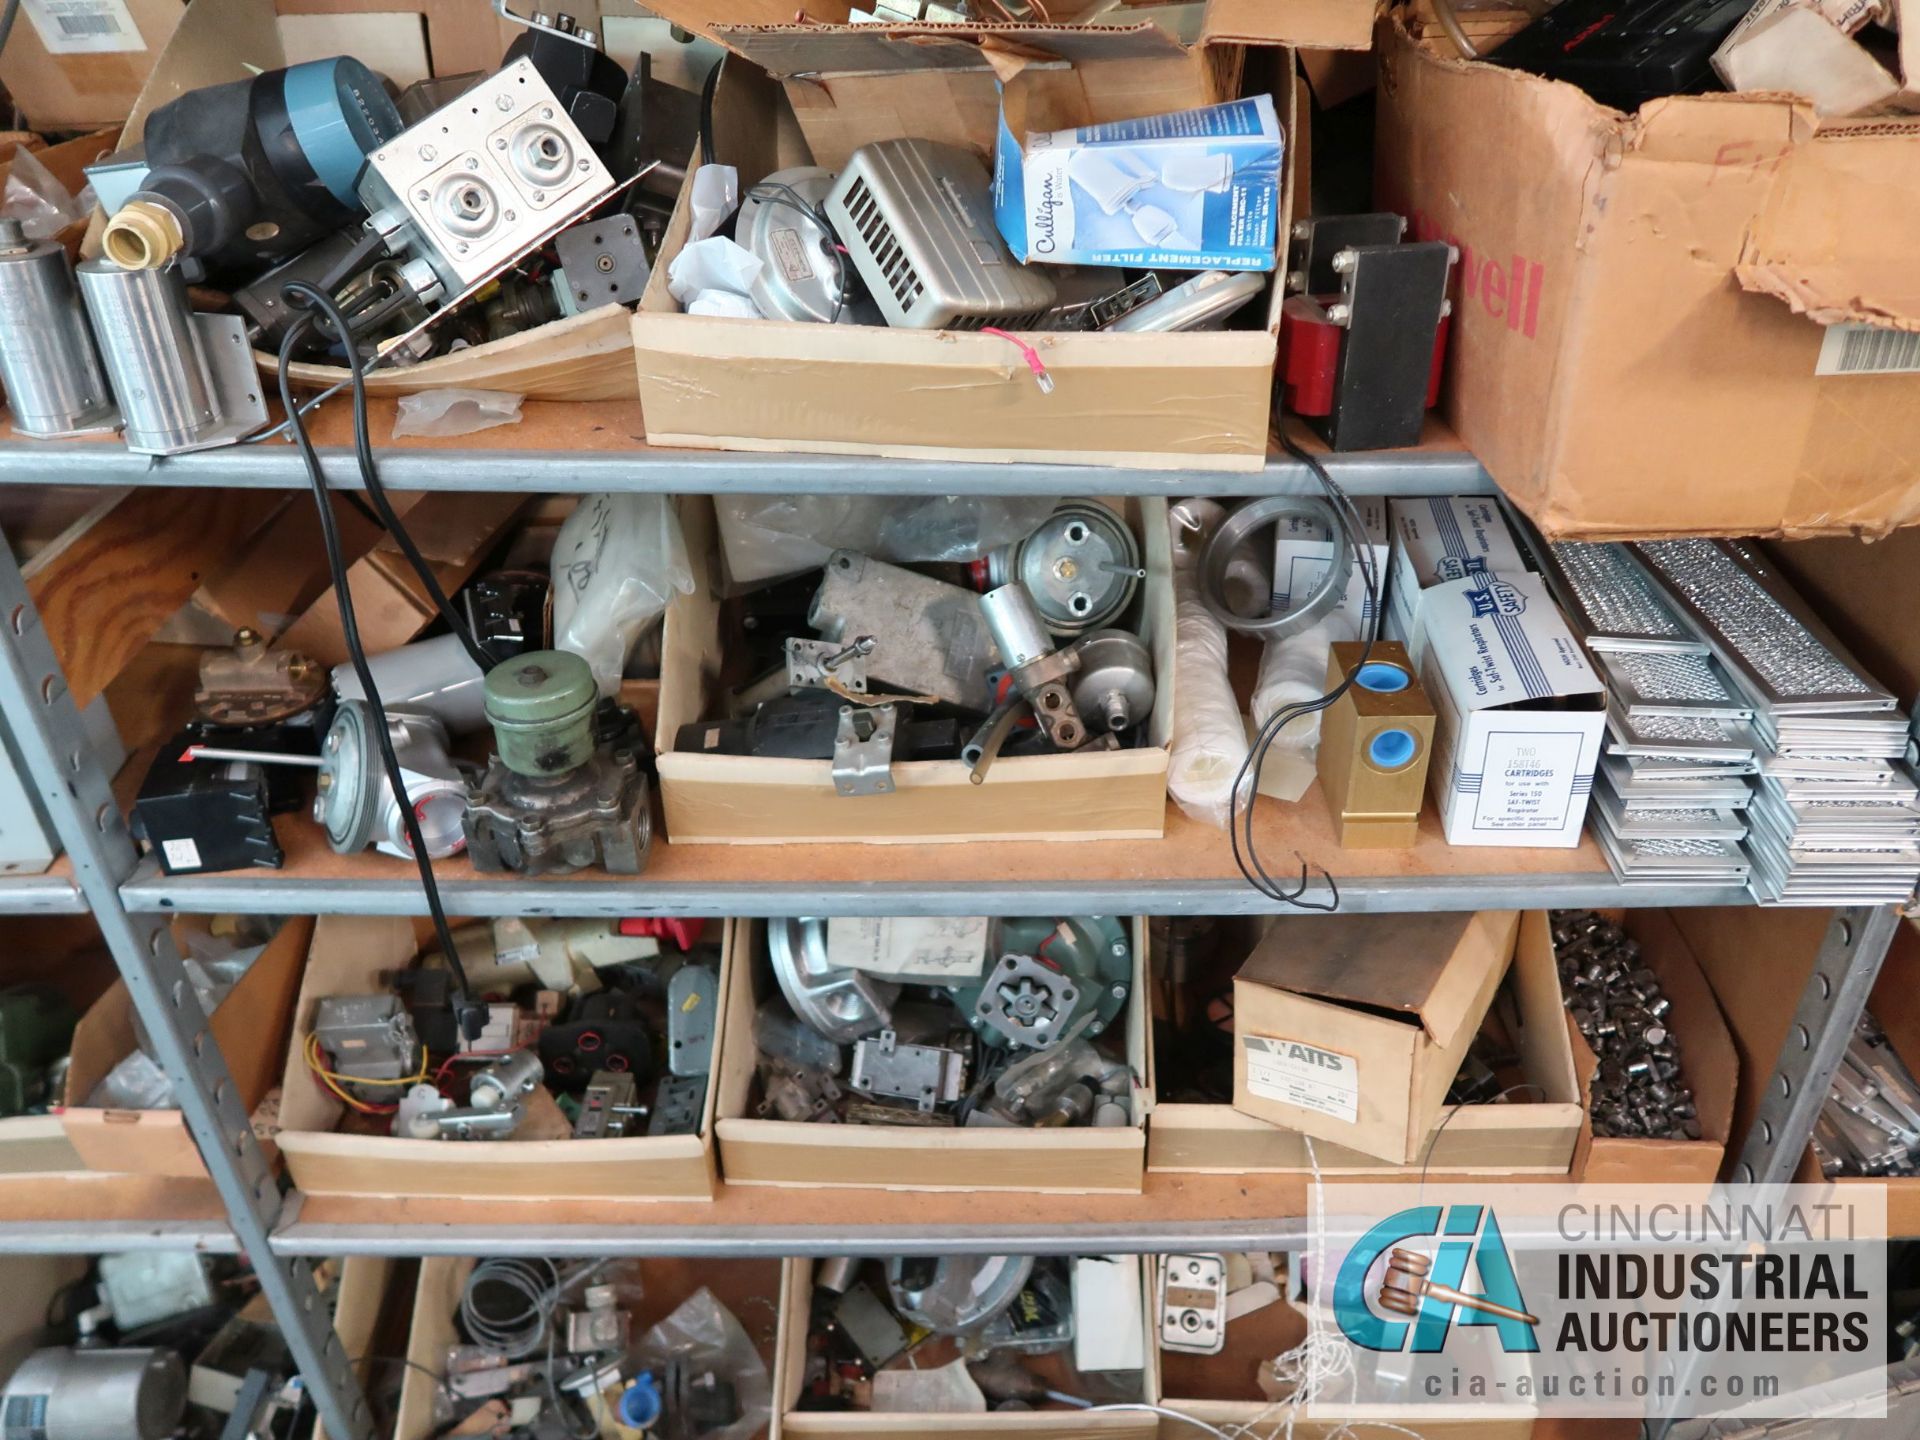 CONTENTS OF (16) SHELVES INCLUDING MISCELLANEOUS VALVES, THERMOSTATS, ANALYZERS, ELECTRICAL, CONTROL - Image 41 of 47